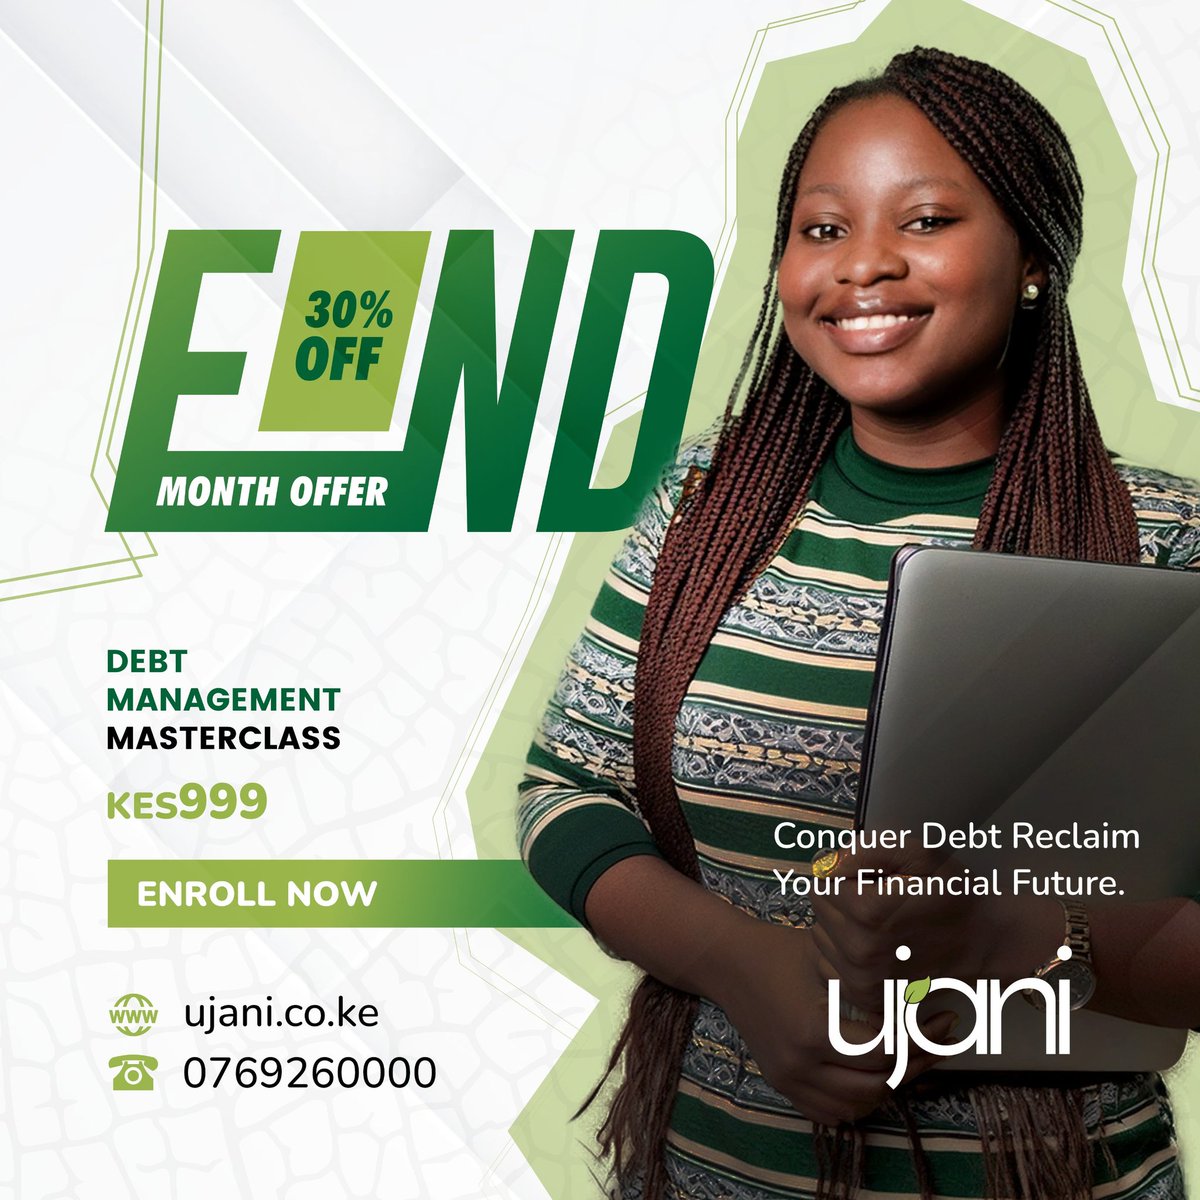 Take control of your finances Today! 

Get 30% off our 30-minute debt management course at ujani.co.ke. 

Learn essential strategies to manage debt efficiently and secure your financial future. 

Don't miss out on this limited-time offer!

 #DebtManagement